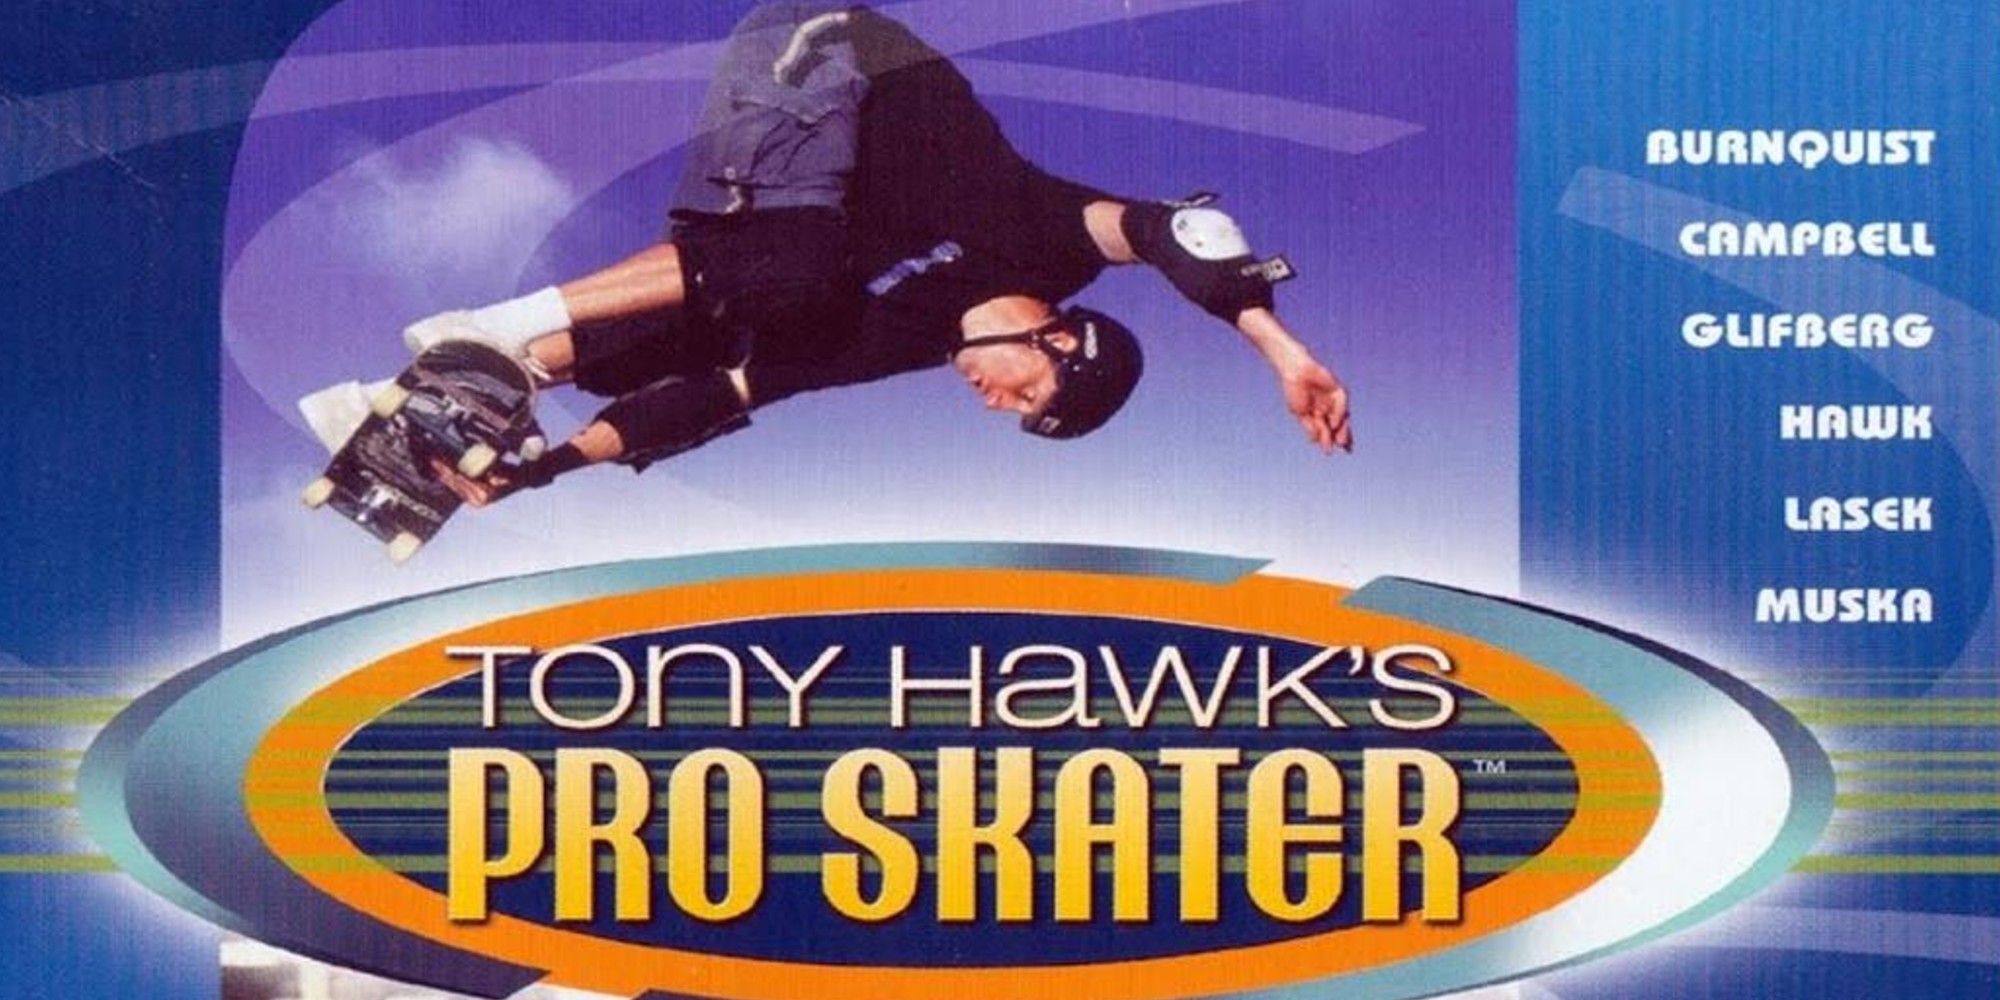 Tony Hawk's Pro Skaters box art shows off the game